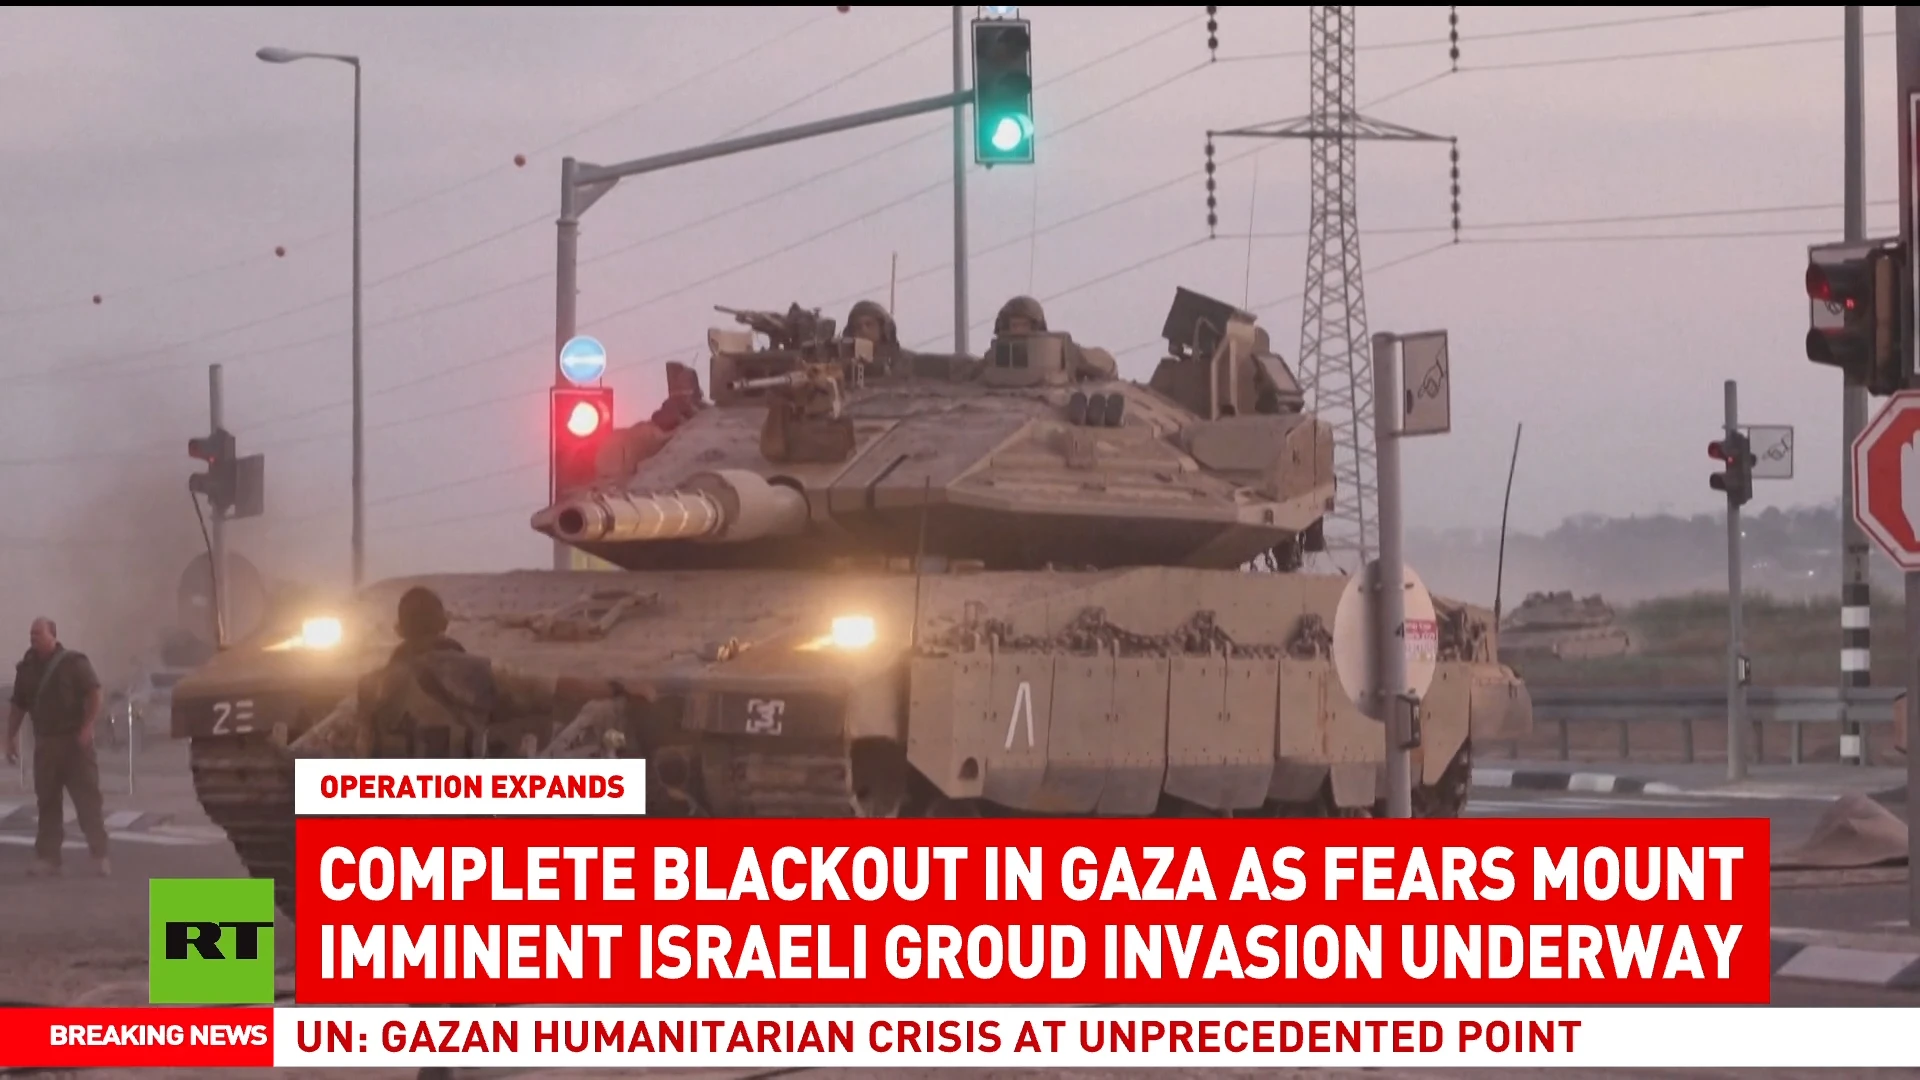 ‘Very violent bombing’ | Israel ‘expands’ operations in Gaza